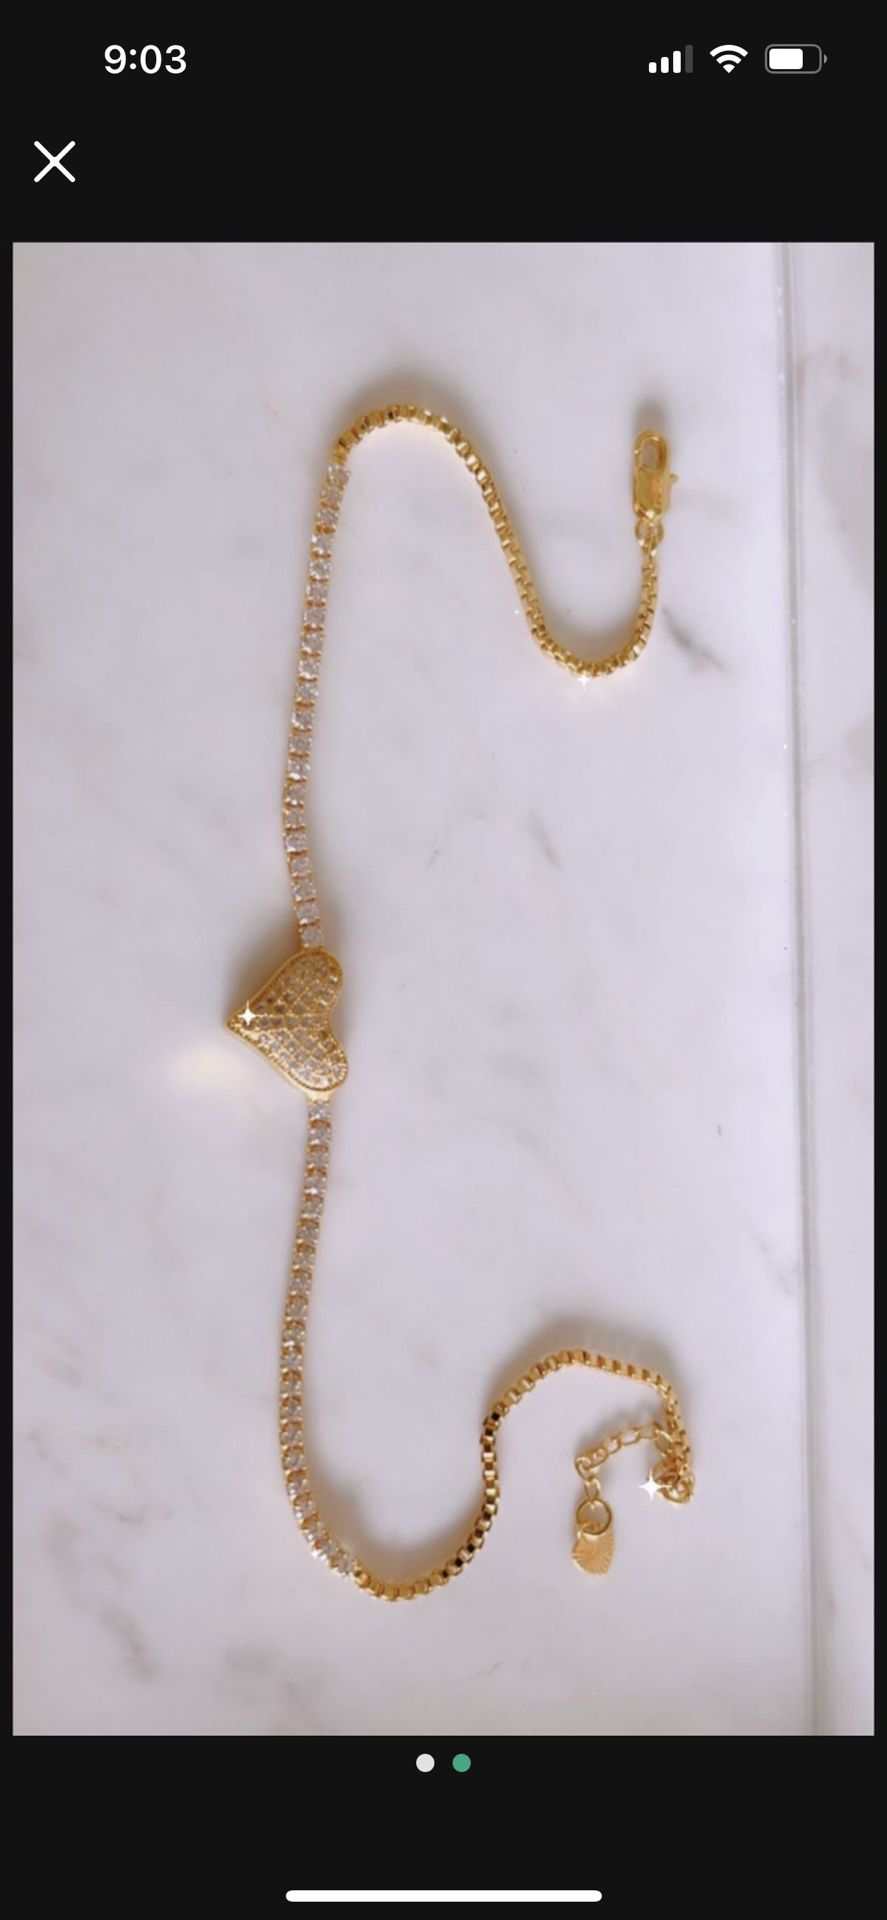 Gold Heart Crystal Anklet Jewelry. New!